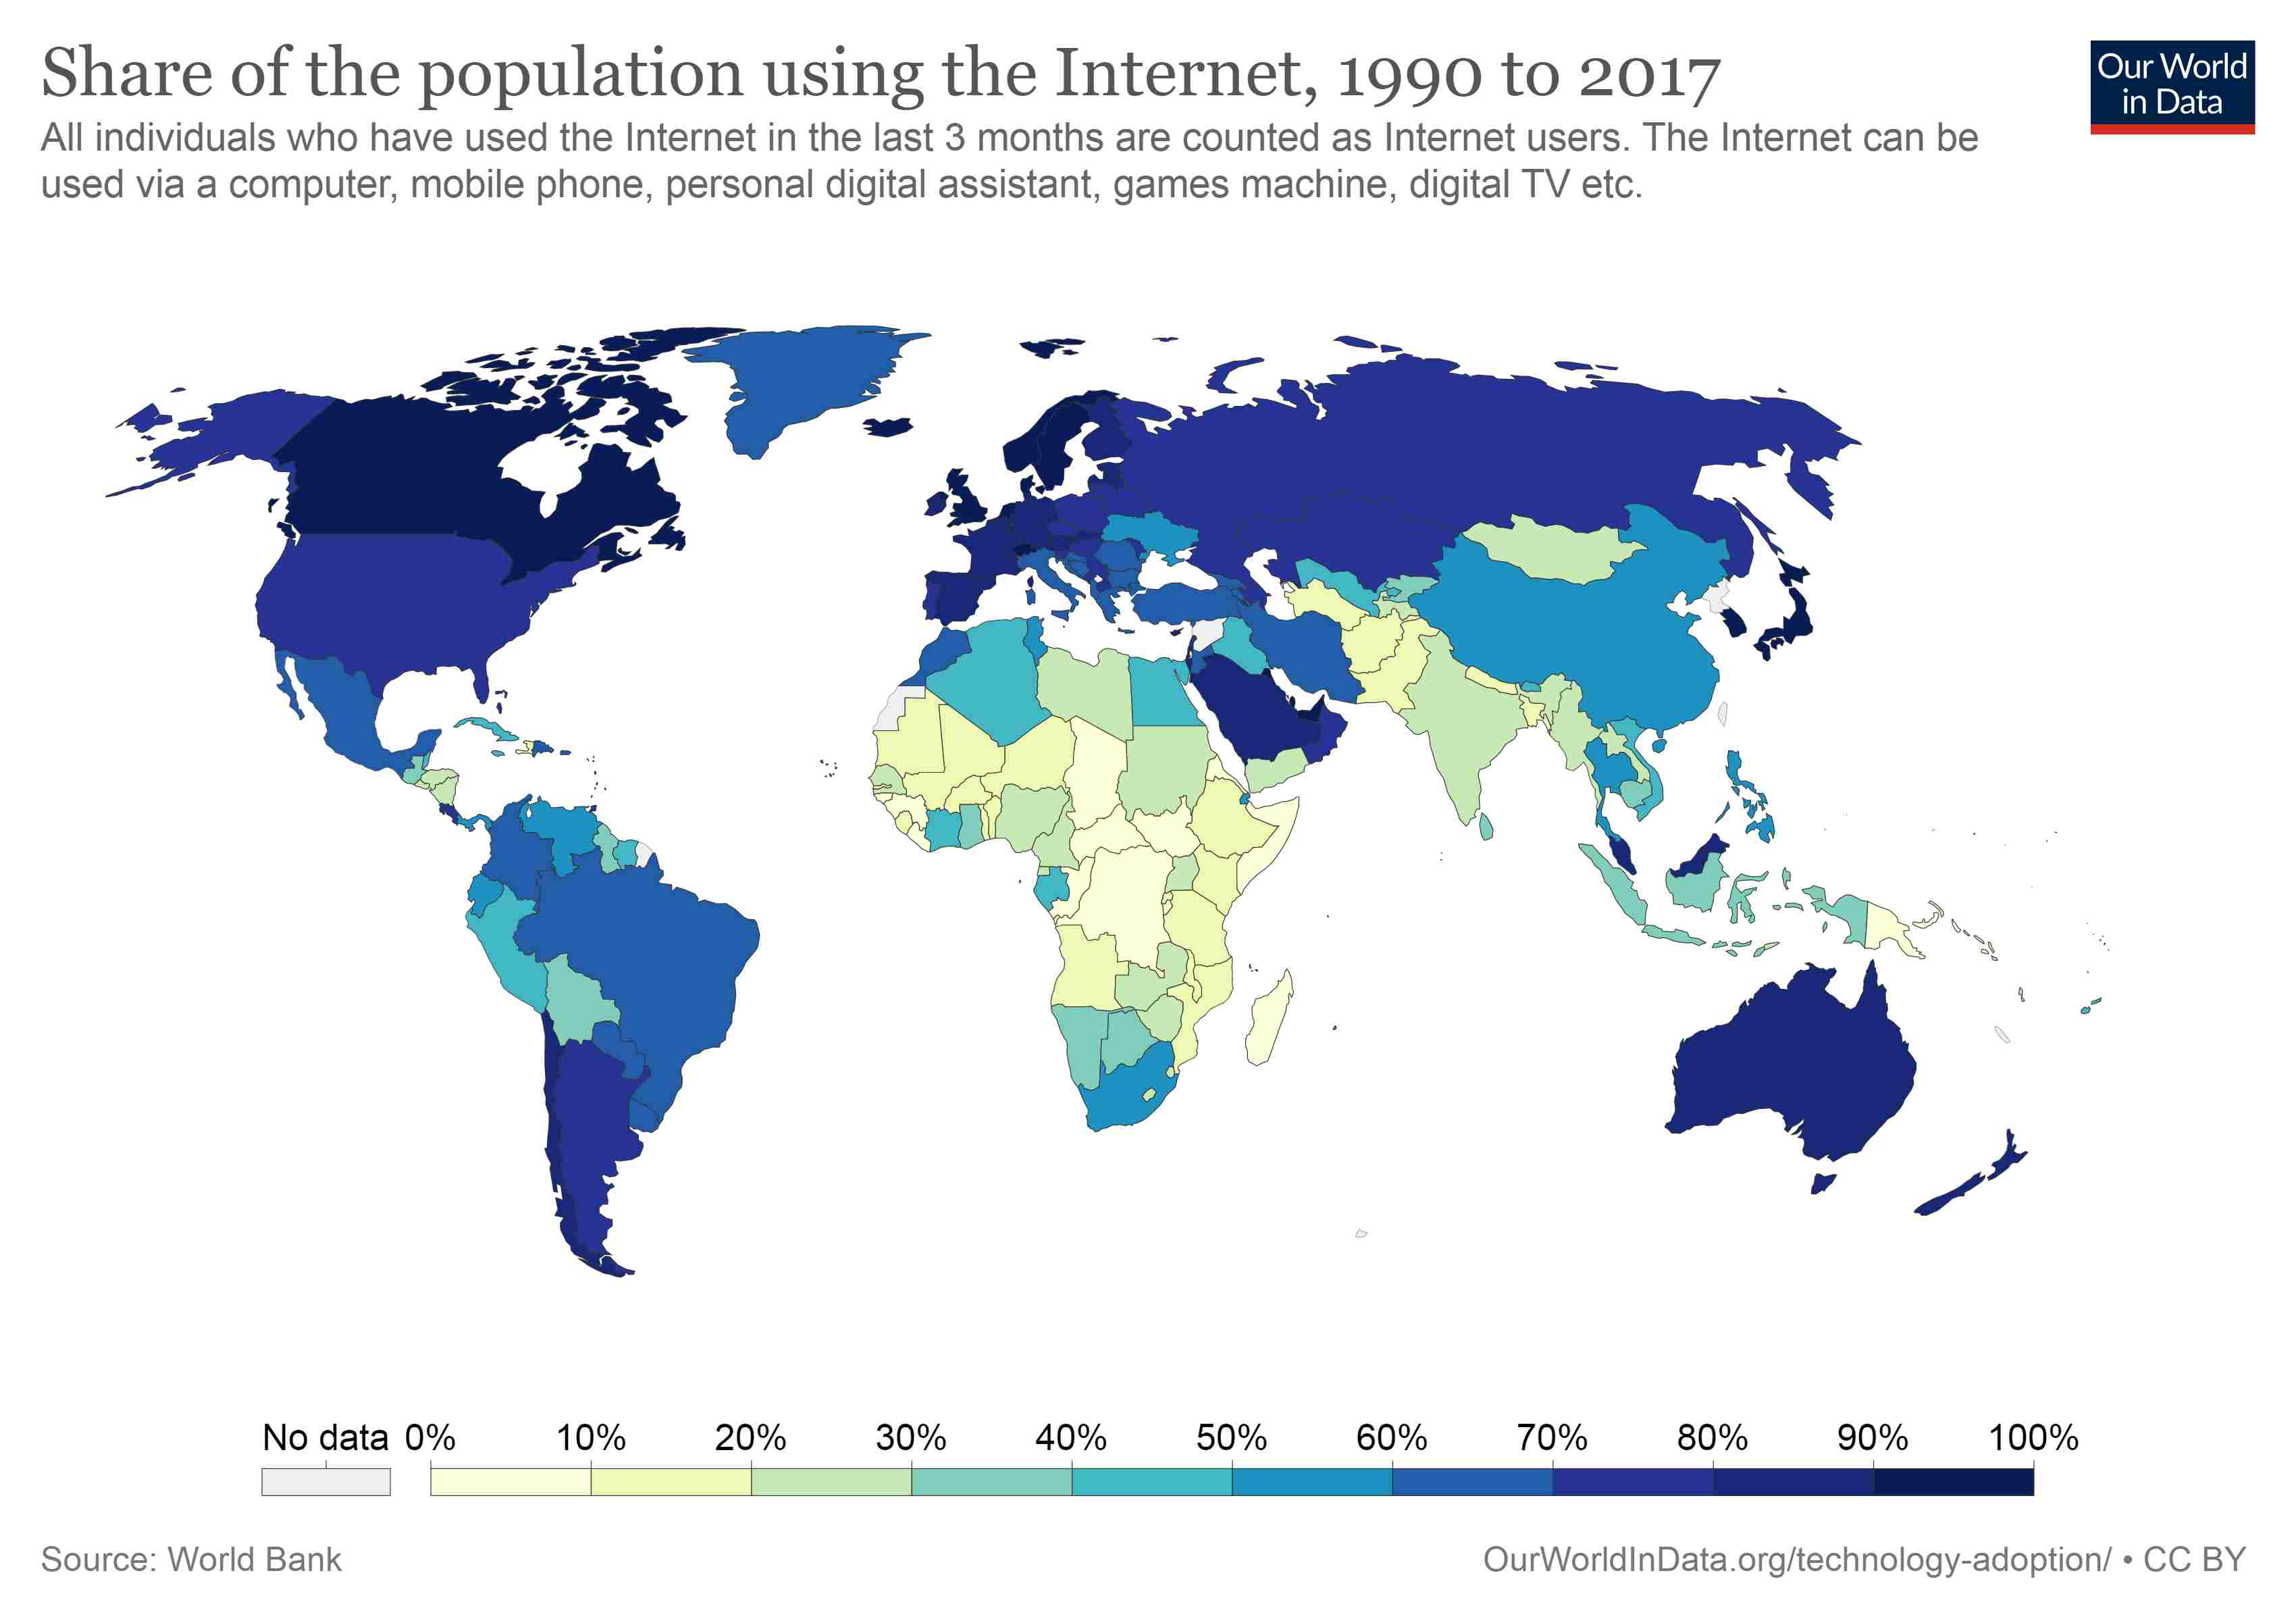 Images Wikimedia Commons/9 Our World in Data Share_of_individuals_using_the_internet.jpg